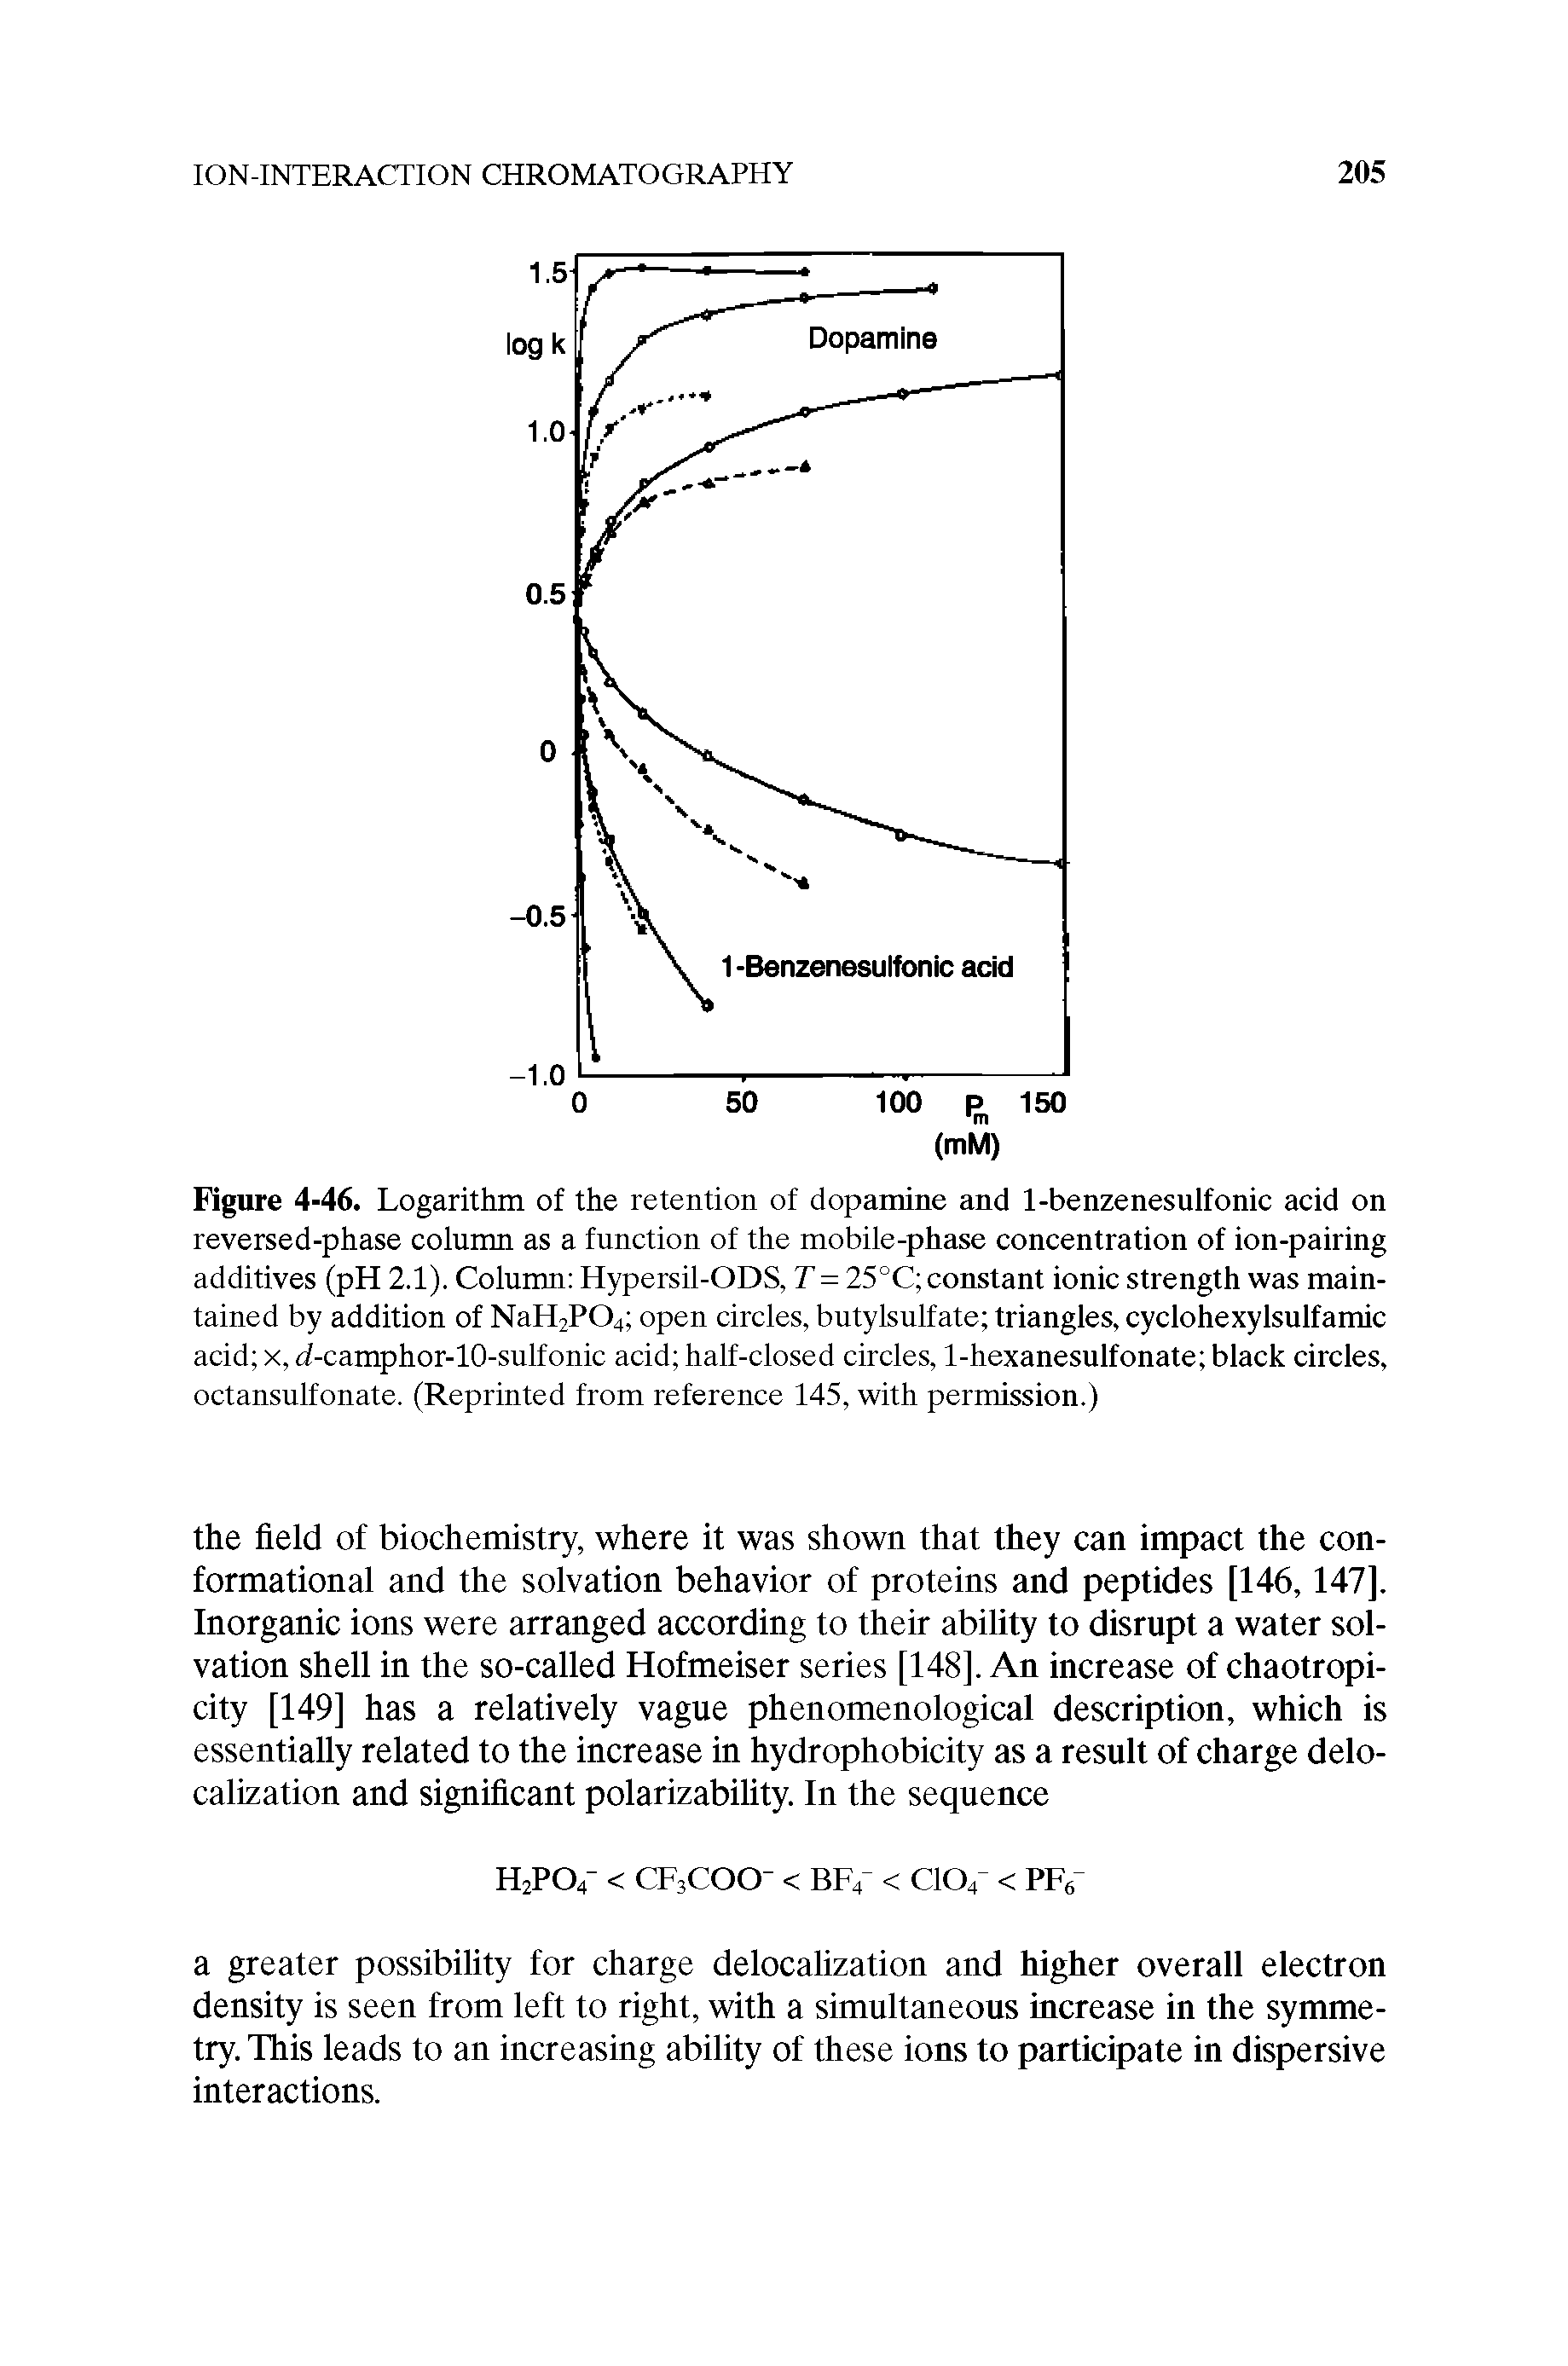 Figure 4-46. Logarithm of the retention of dopamine and 1-benzenesulfonic acid on reversed-phase column as a function of the mobile-phase concentration of ion-pairing additives (pH 2.1). Column Hypersil-ODS, T = 25°C constant ionic strength was maintained by addition of NaH2P04 open circles, butylsulfate triangles, cyclohexylsnlfamic acid x, li-camphor-lO-suIfonic acid half-closed circles, 1-hexanesnlfonate black circles, octansulfonate. (Reprinted from reference 145, with permission.)...